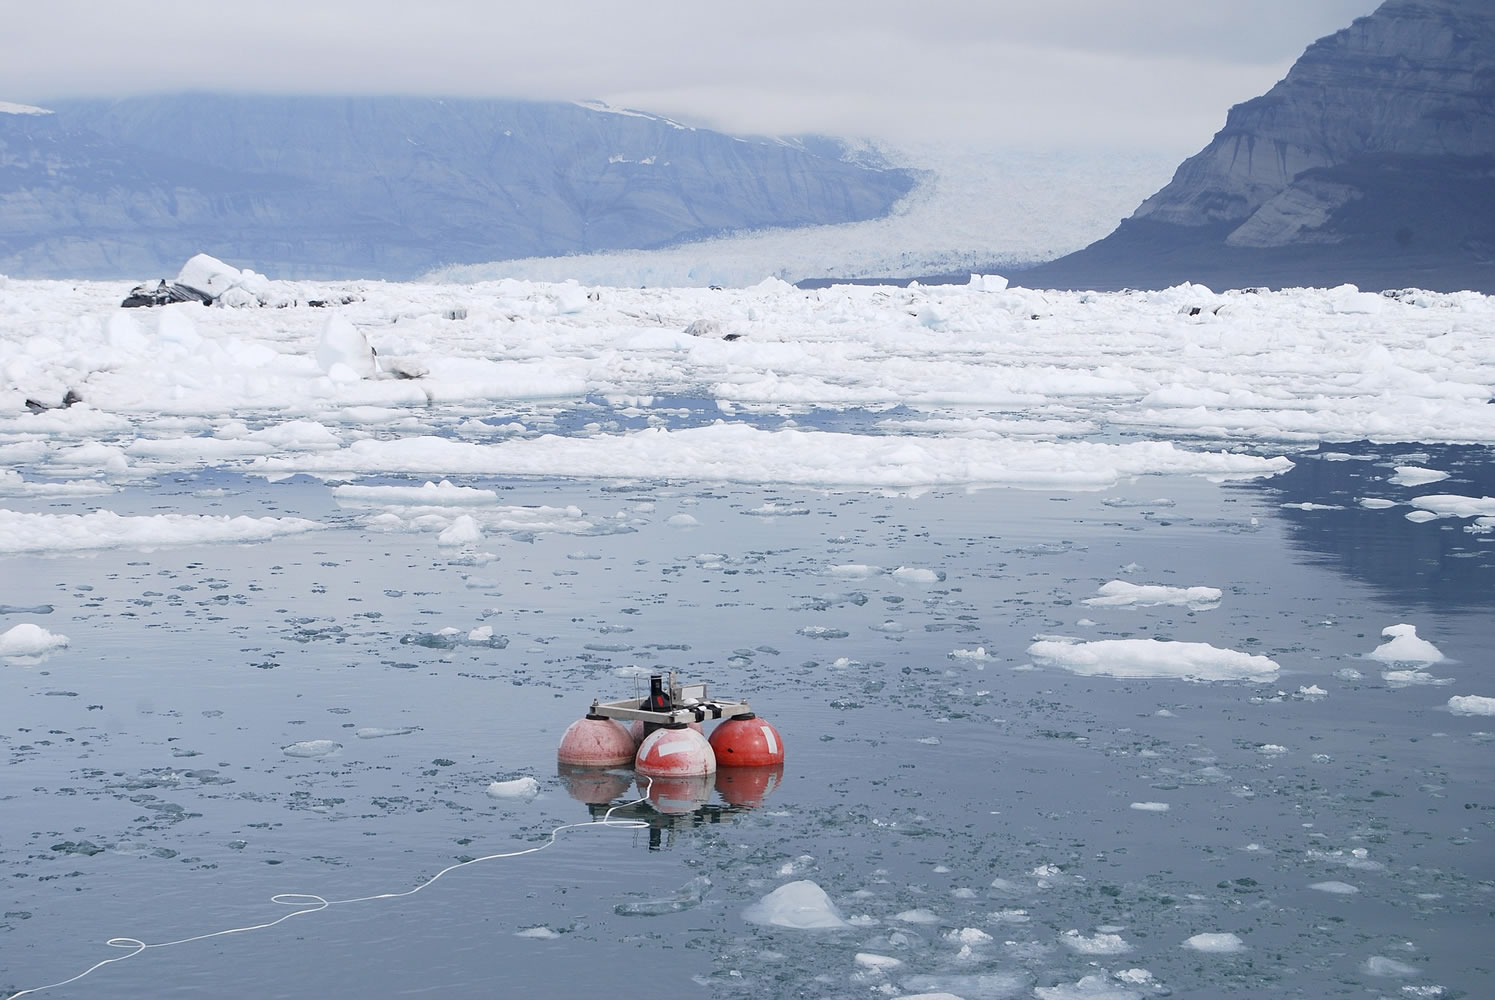 University of Washington files
A hydrophone is deployed in 2009 in Icy Bay, Alaska. Glaciologist Erin Pettit began a research project to find out how calving glacier ice sounded to a humpback whale.